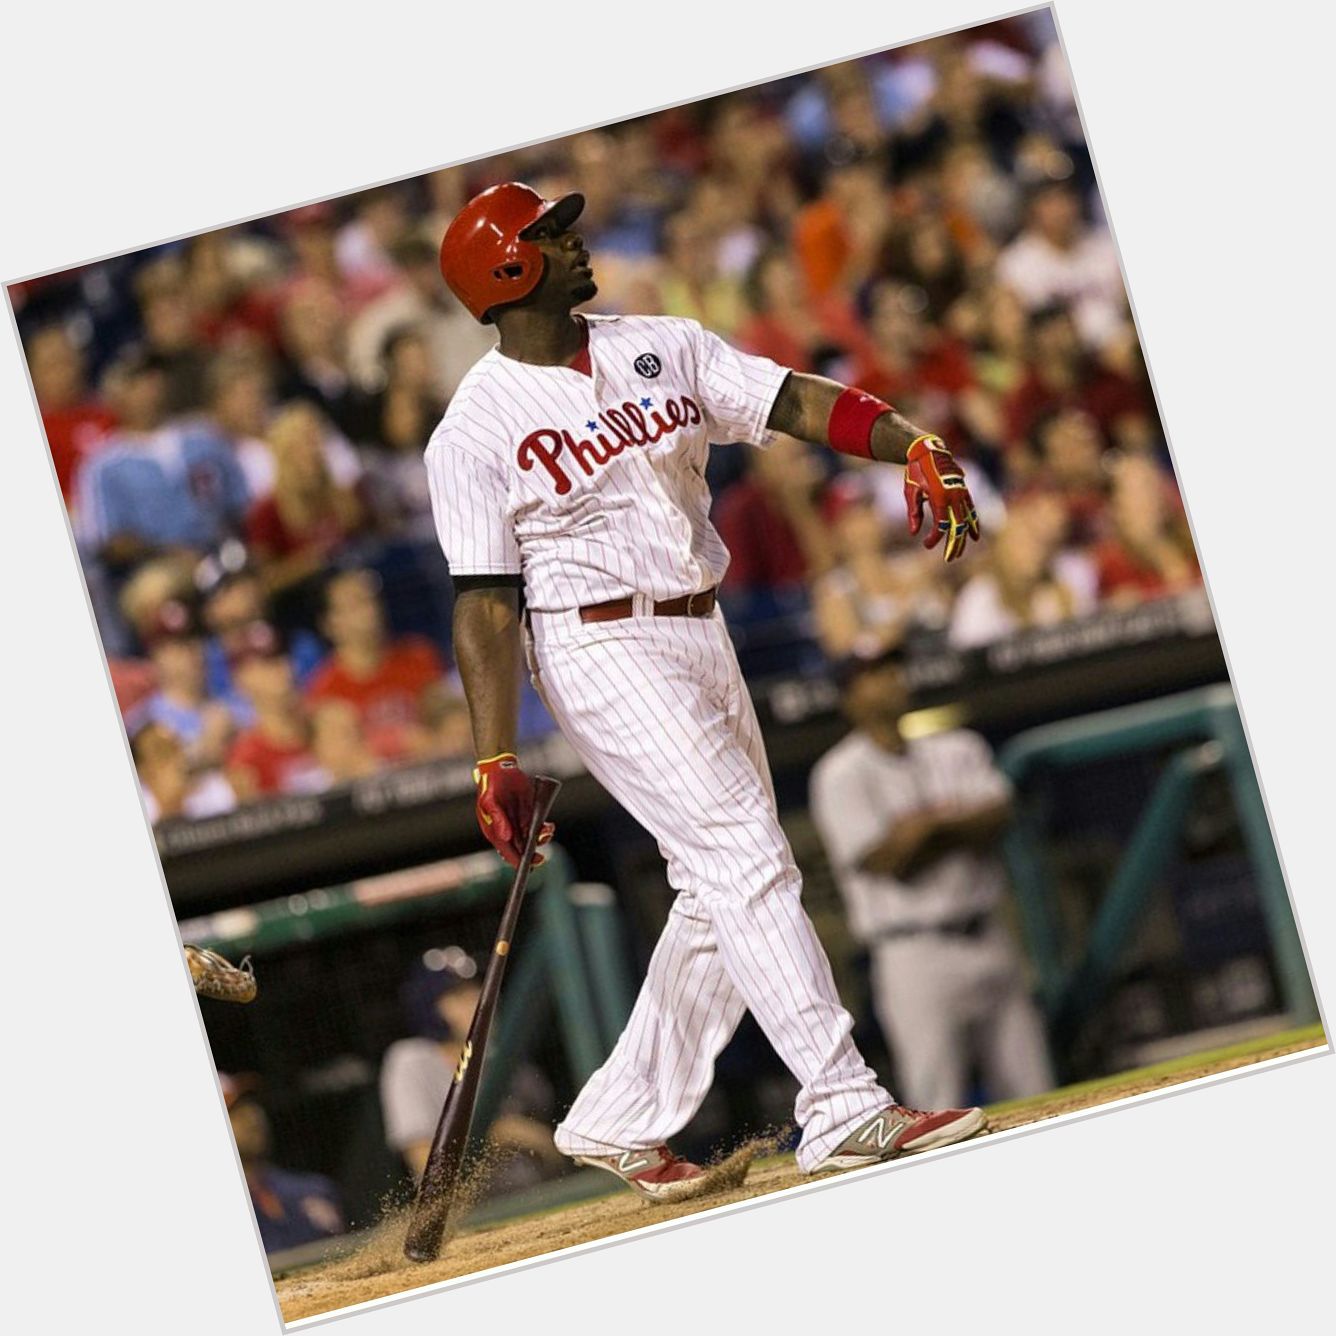 Happy 35th birthday to Ryan Howard one of my favorite players. 